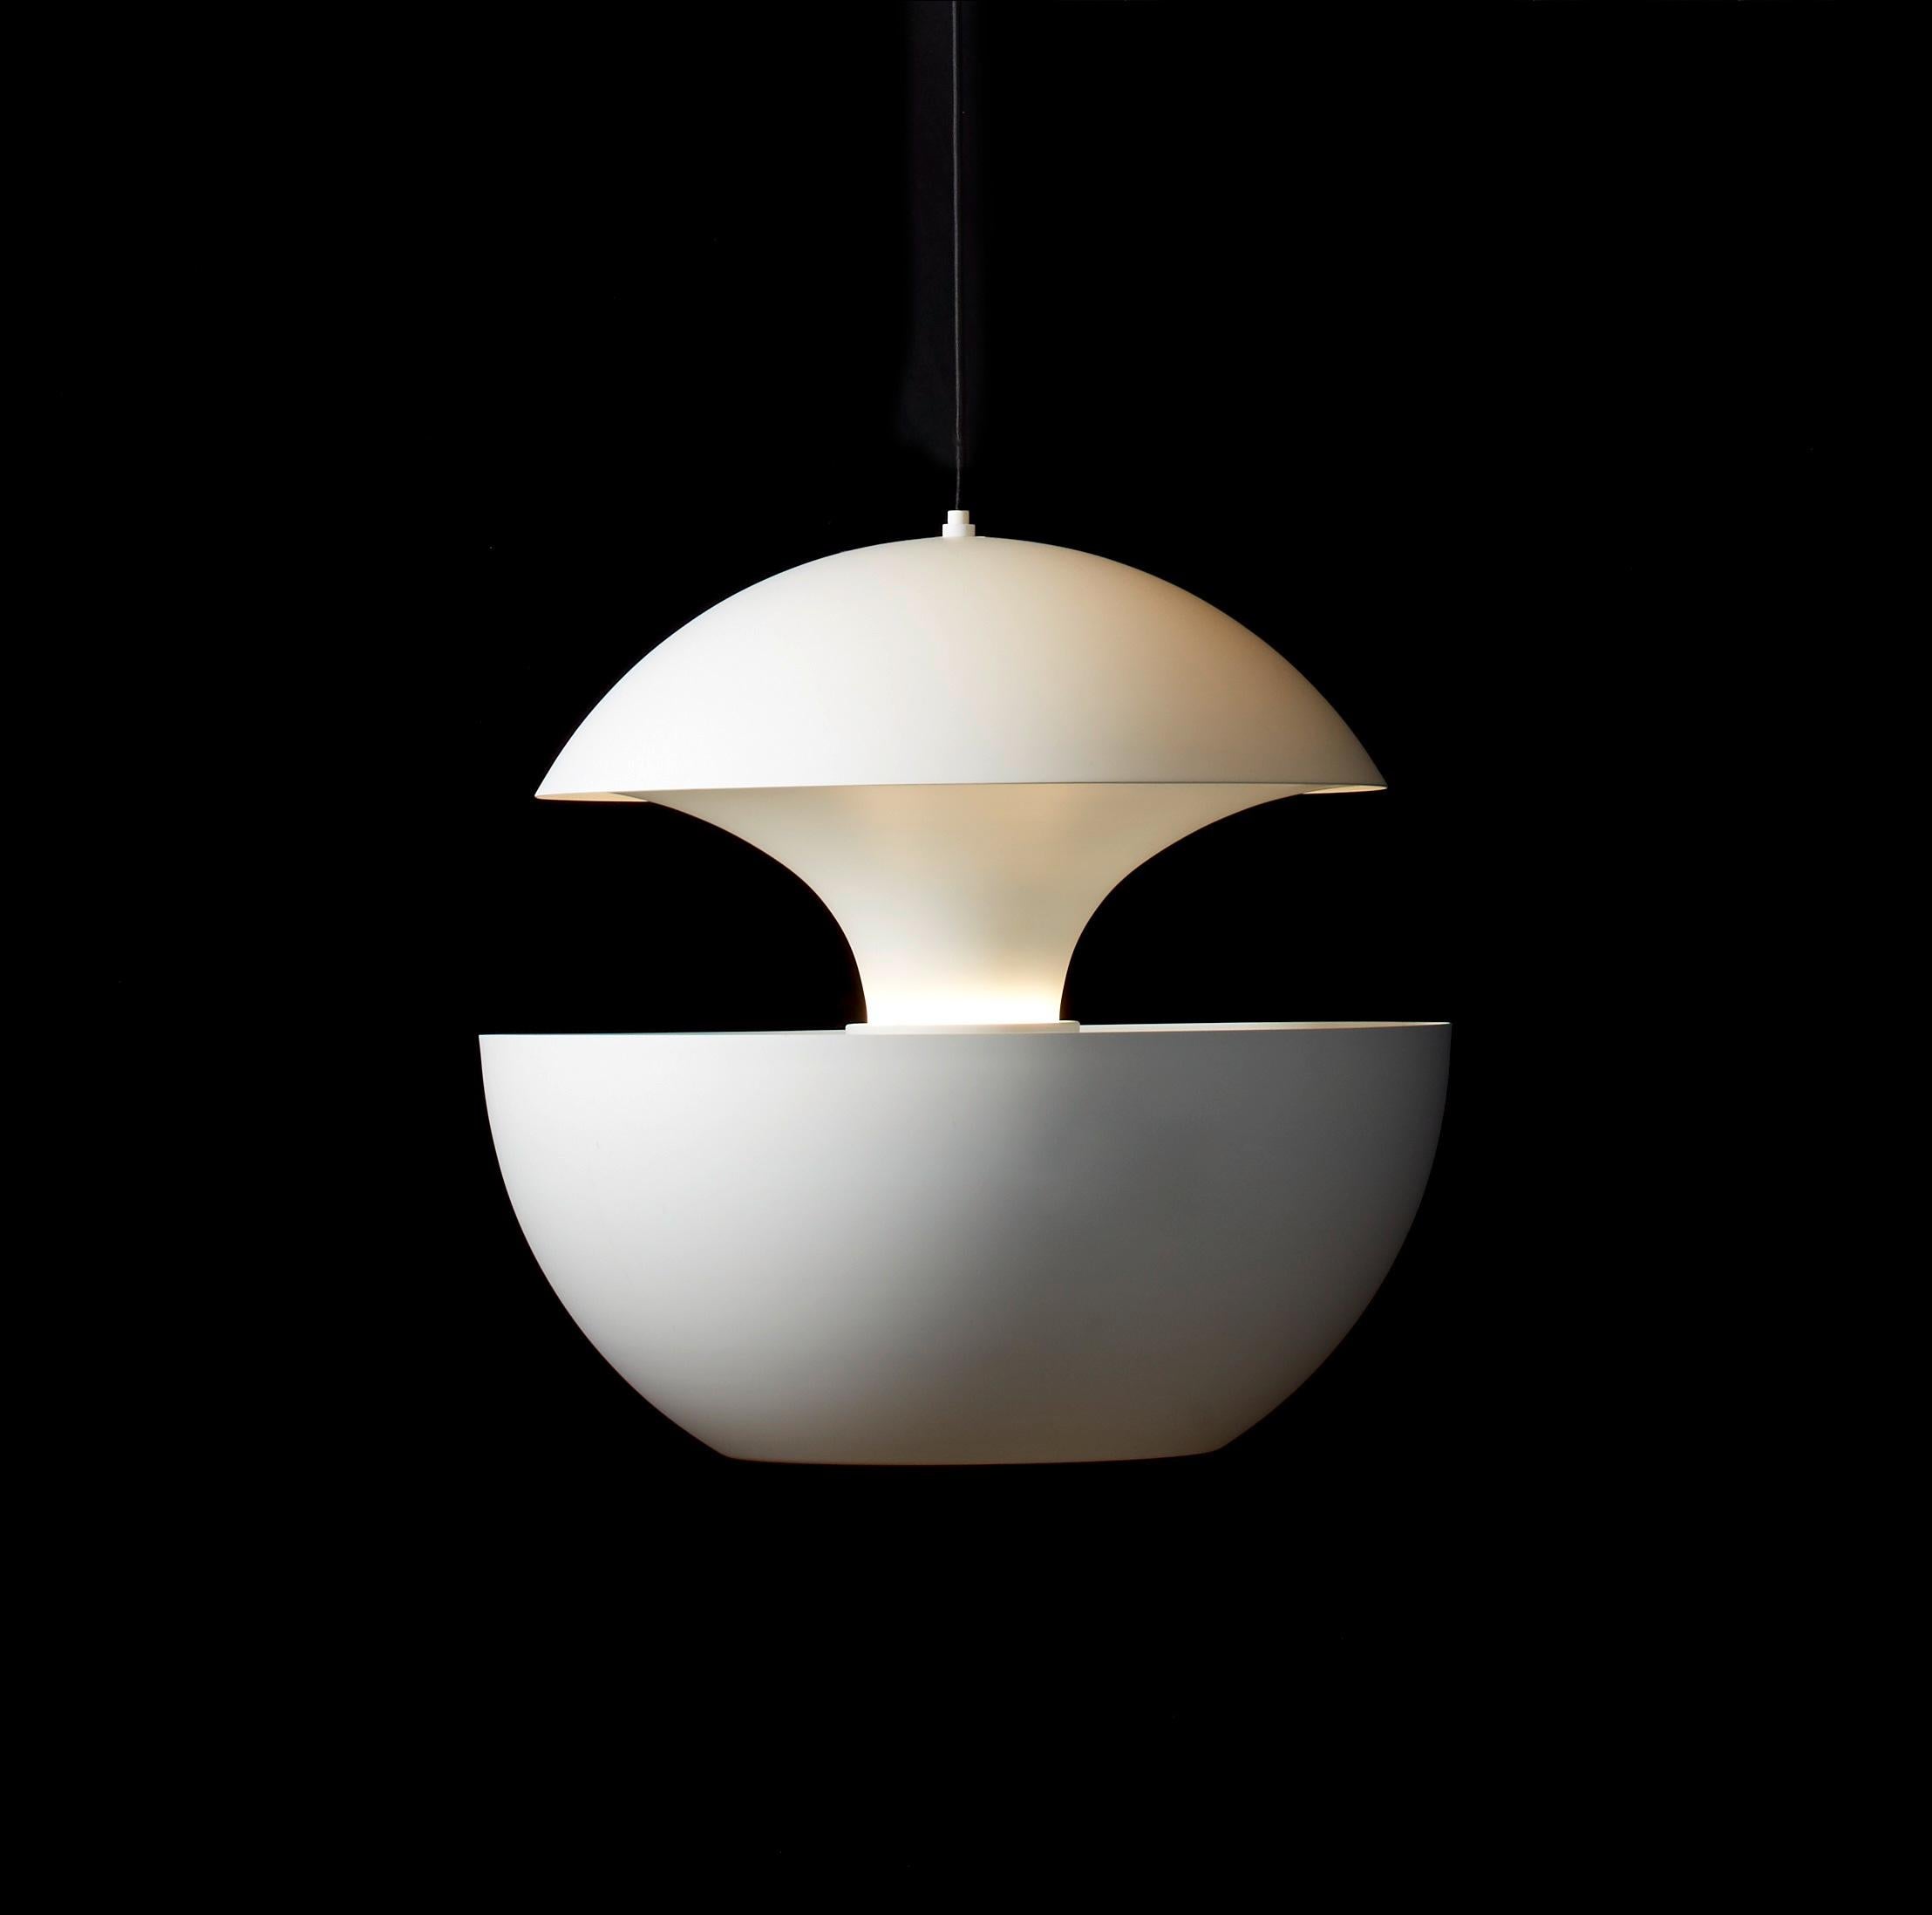 Here comes the sun extra large white pendant lamp by Bertrand Balas
Dimensions: D 45 x H 45 cm
Materials: Aluminum
Available in different sizes and colors

All our lamps can be wired according to each country. If sold to the USA it will be